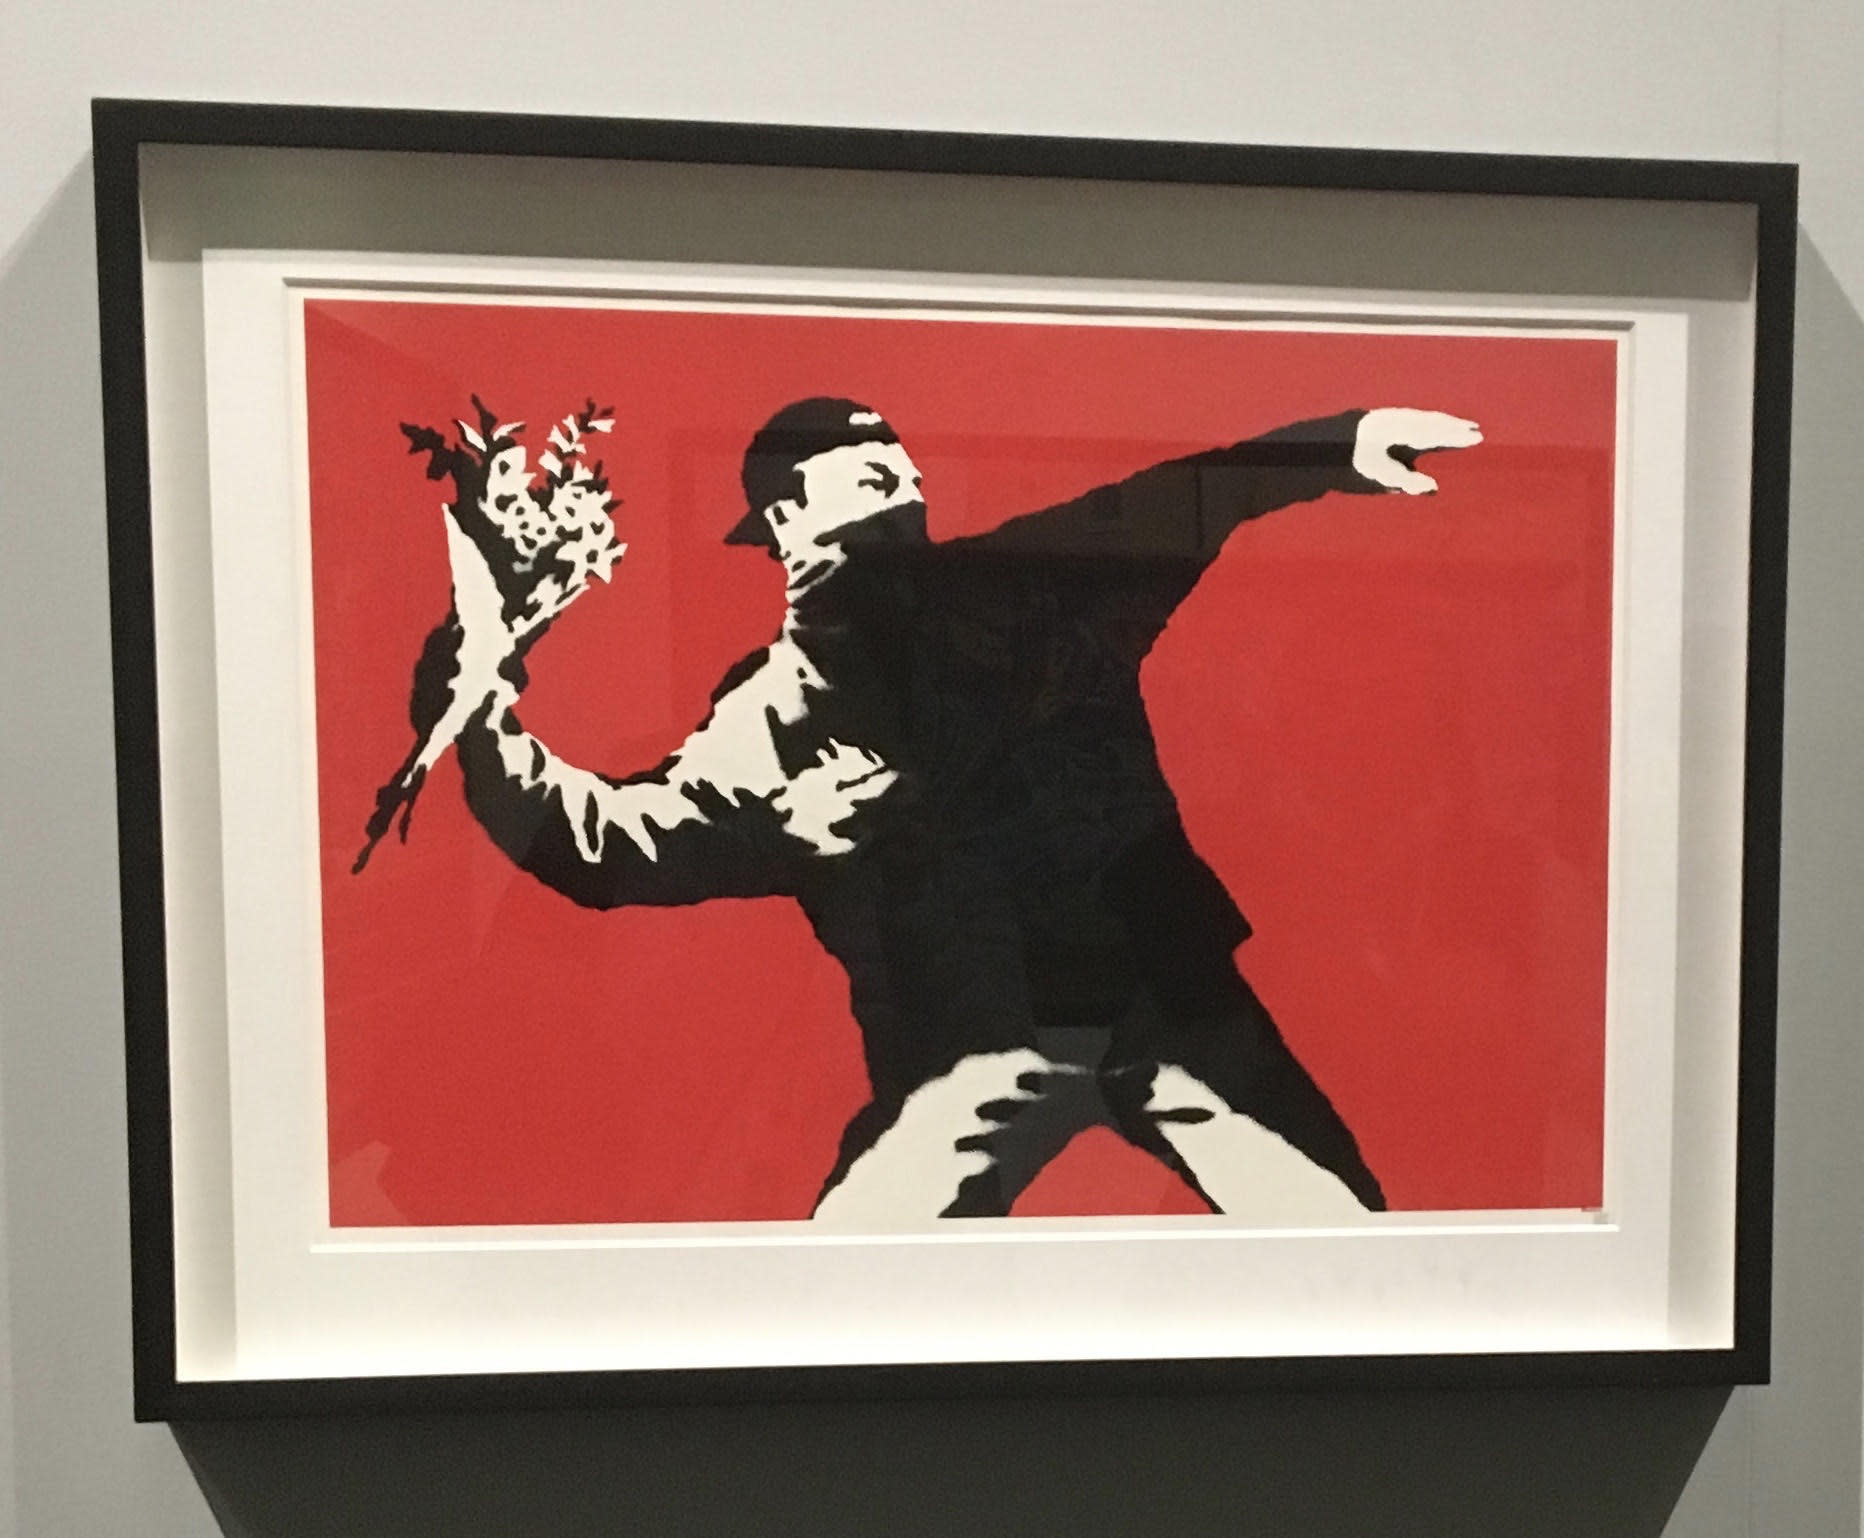 Banksy will come to Mänttä for a free show in May